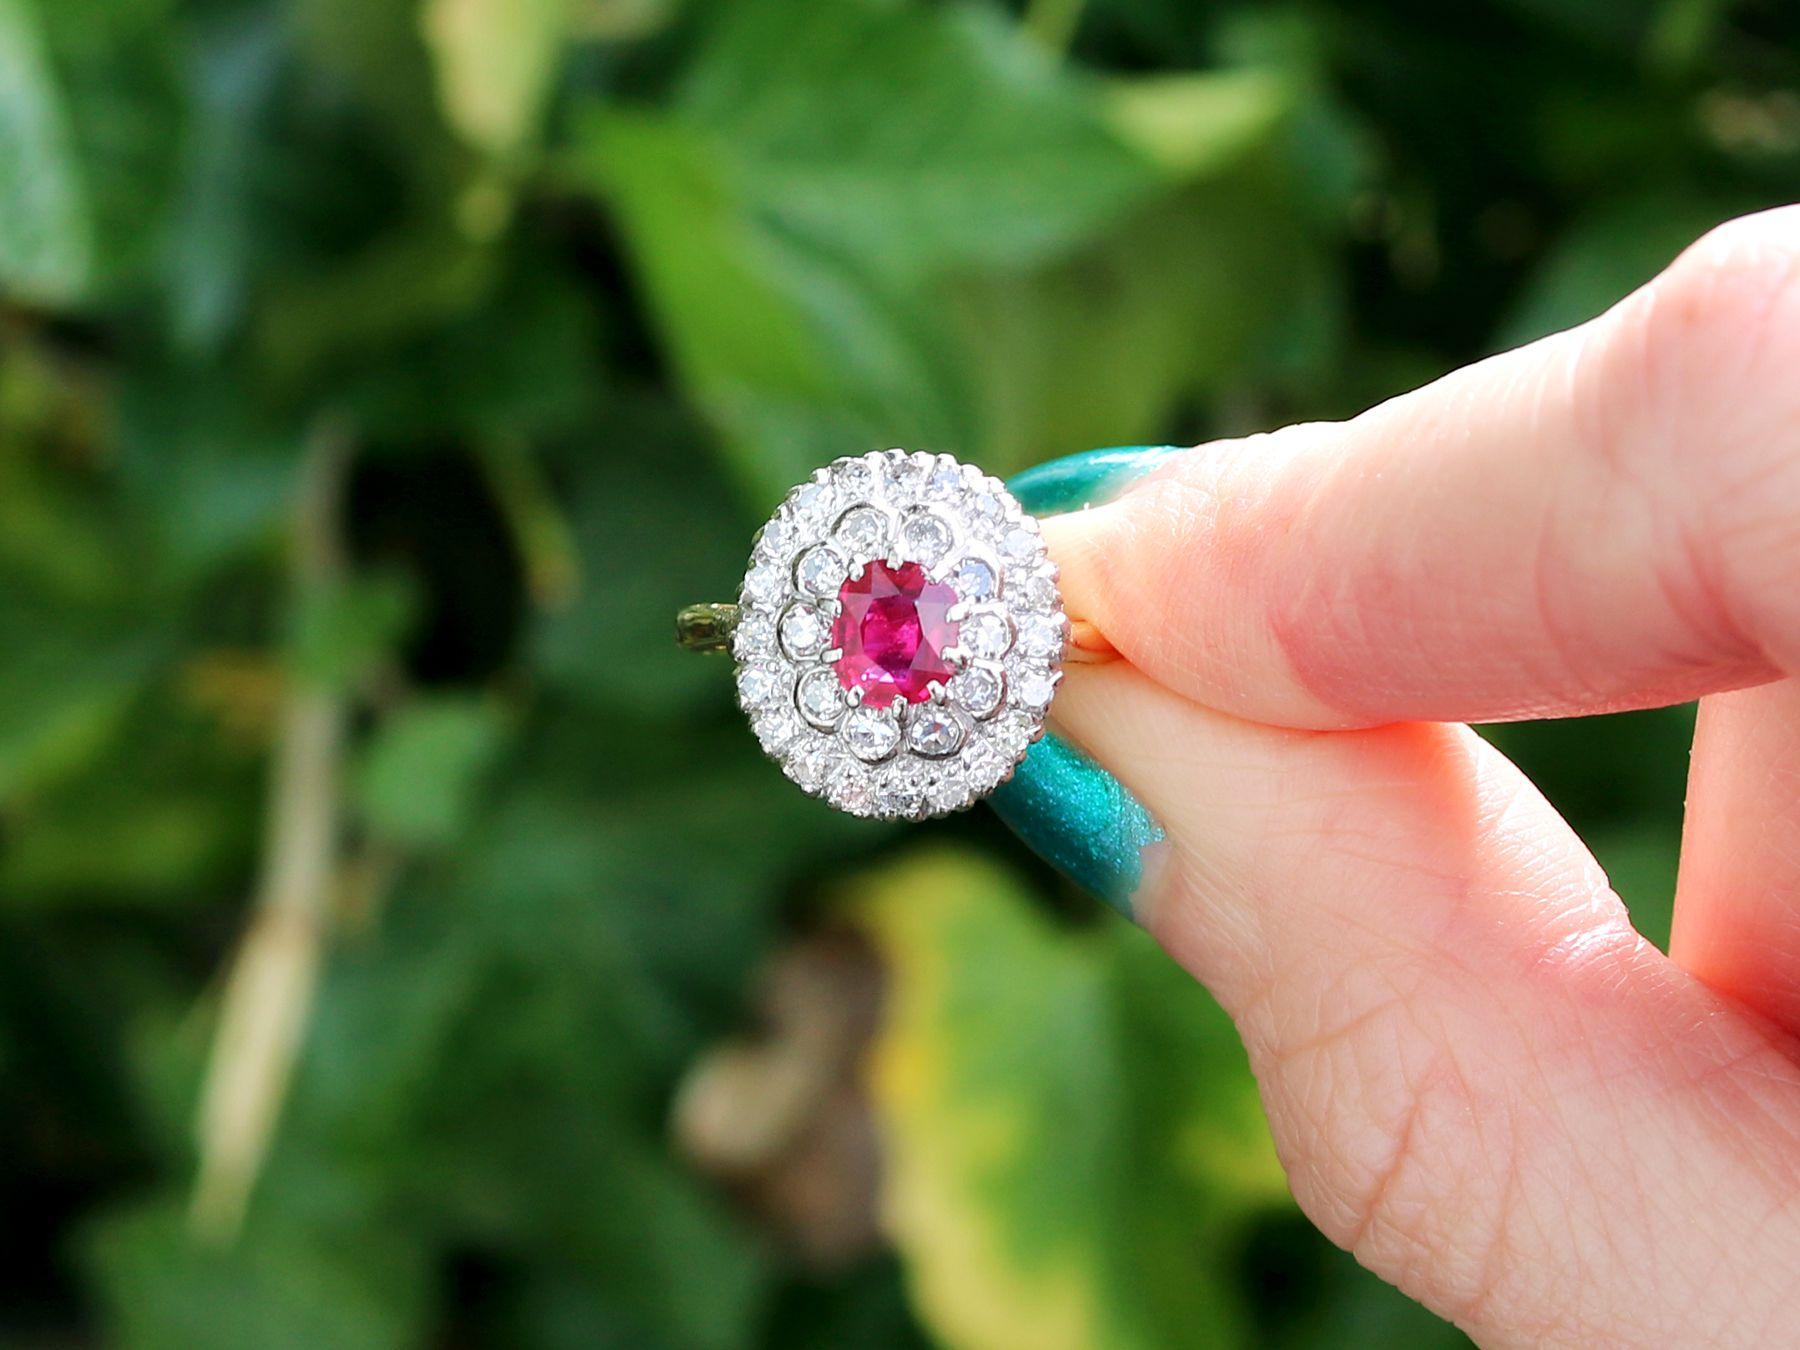 A stunning vintage 0.92 carat ruby and 0.51 carat diamond, 18 karat yellow gold cluster ring; part of our vintage estate jewelry collections.

This stunning, fine and impressive vintage Burmese ruby and diamond cluster ring has been crafted in 18k